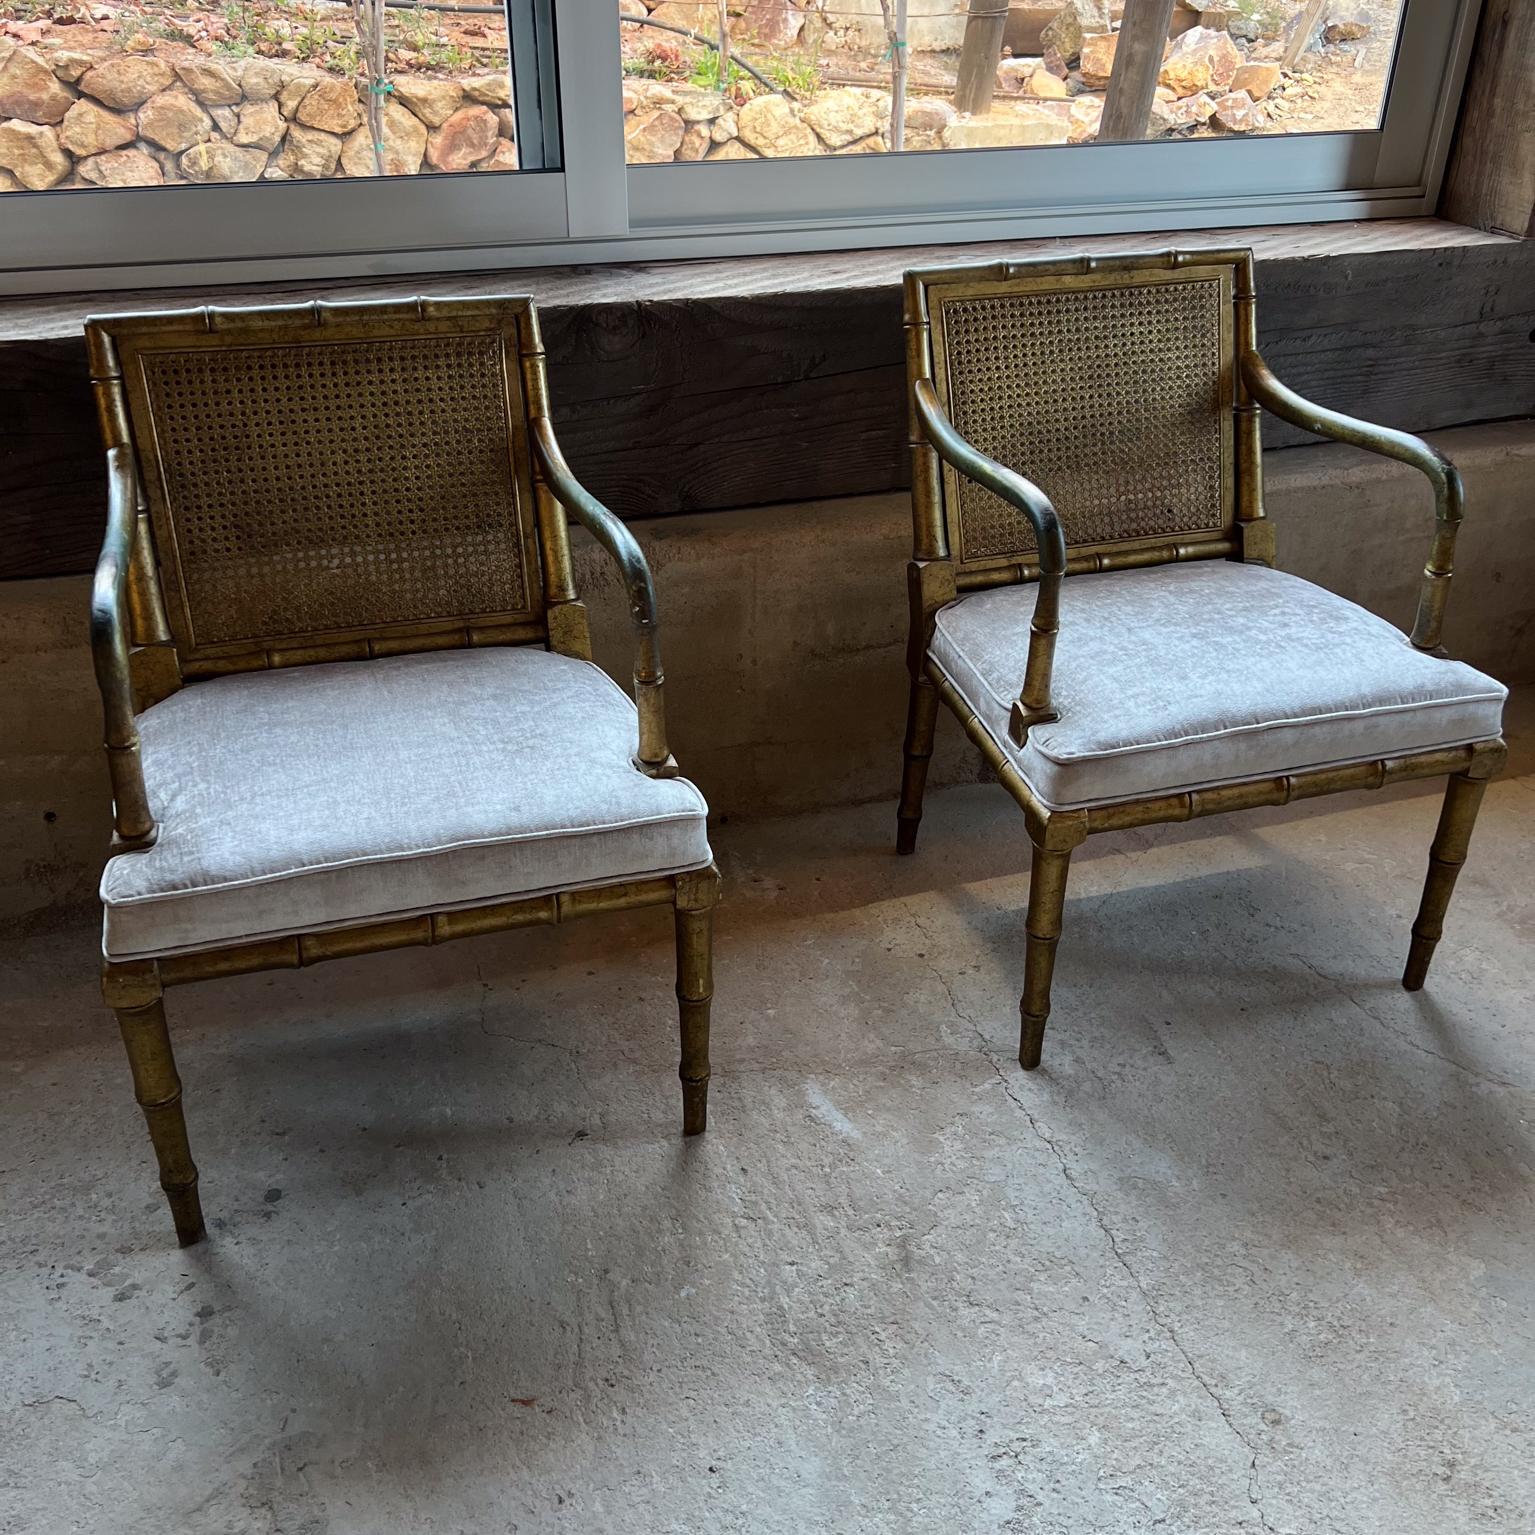 AMBIANIC presents
Pair of Gilded Faux Bamboo Hollywood Regency Style Armchairs
Attribution Hickory Chair Company
No label present.
Original gold leaf finish with vintage patina (unrestored)
New upholstered seat and fabric.
Wear is present on the